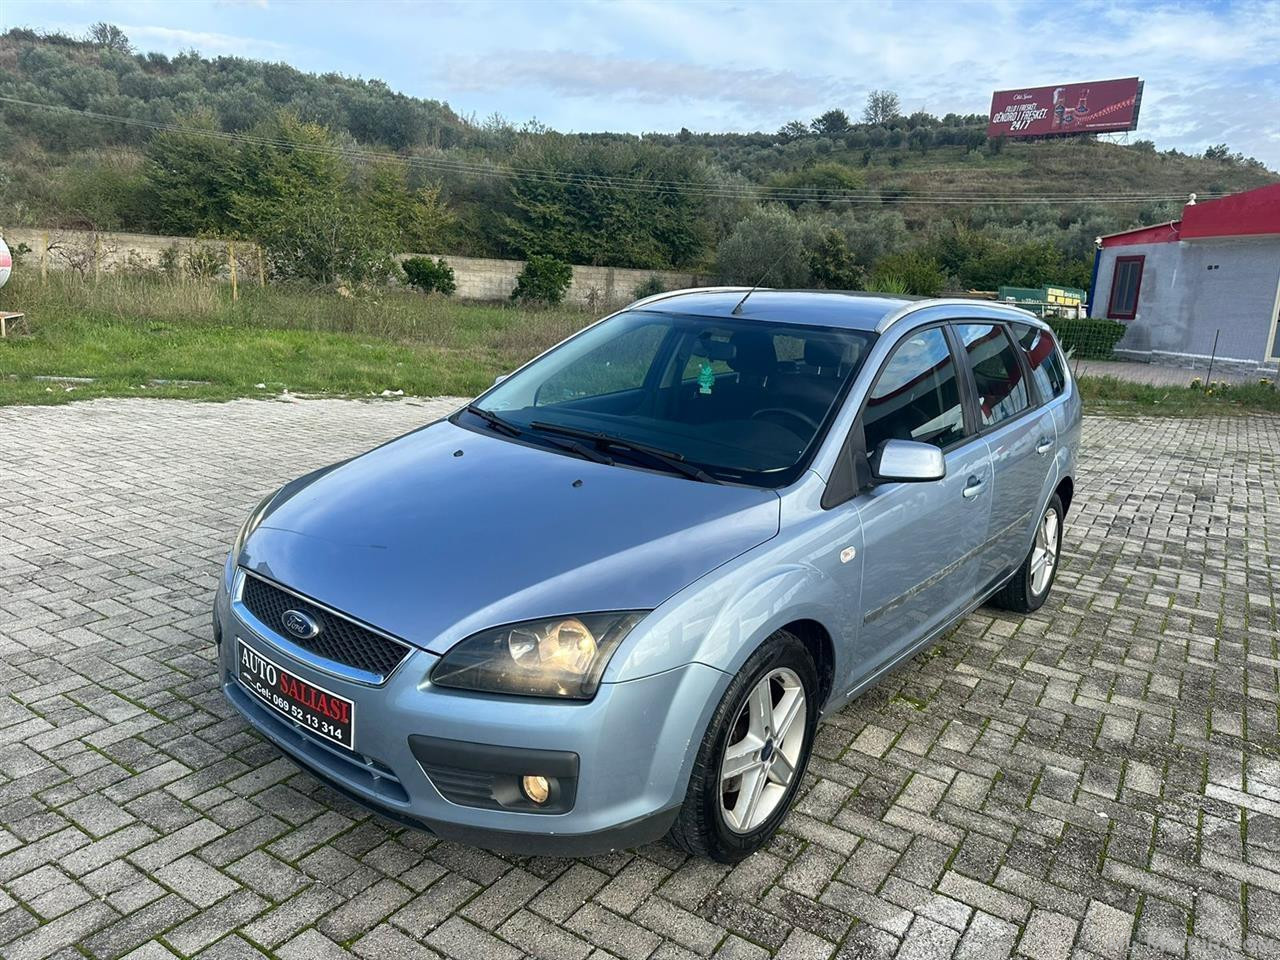 ❗️FORD FOCUS 1.6 NAFTE 2008❗️